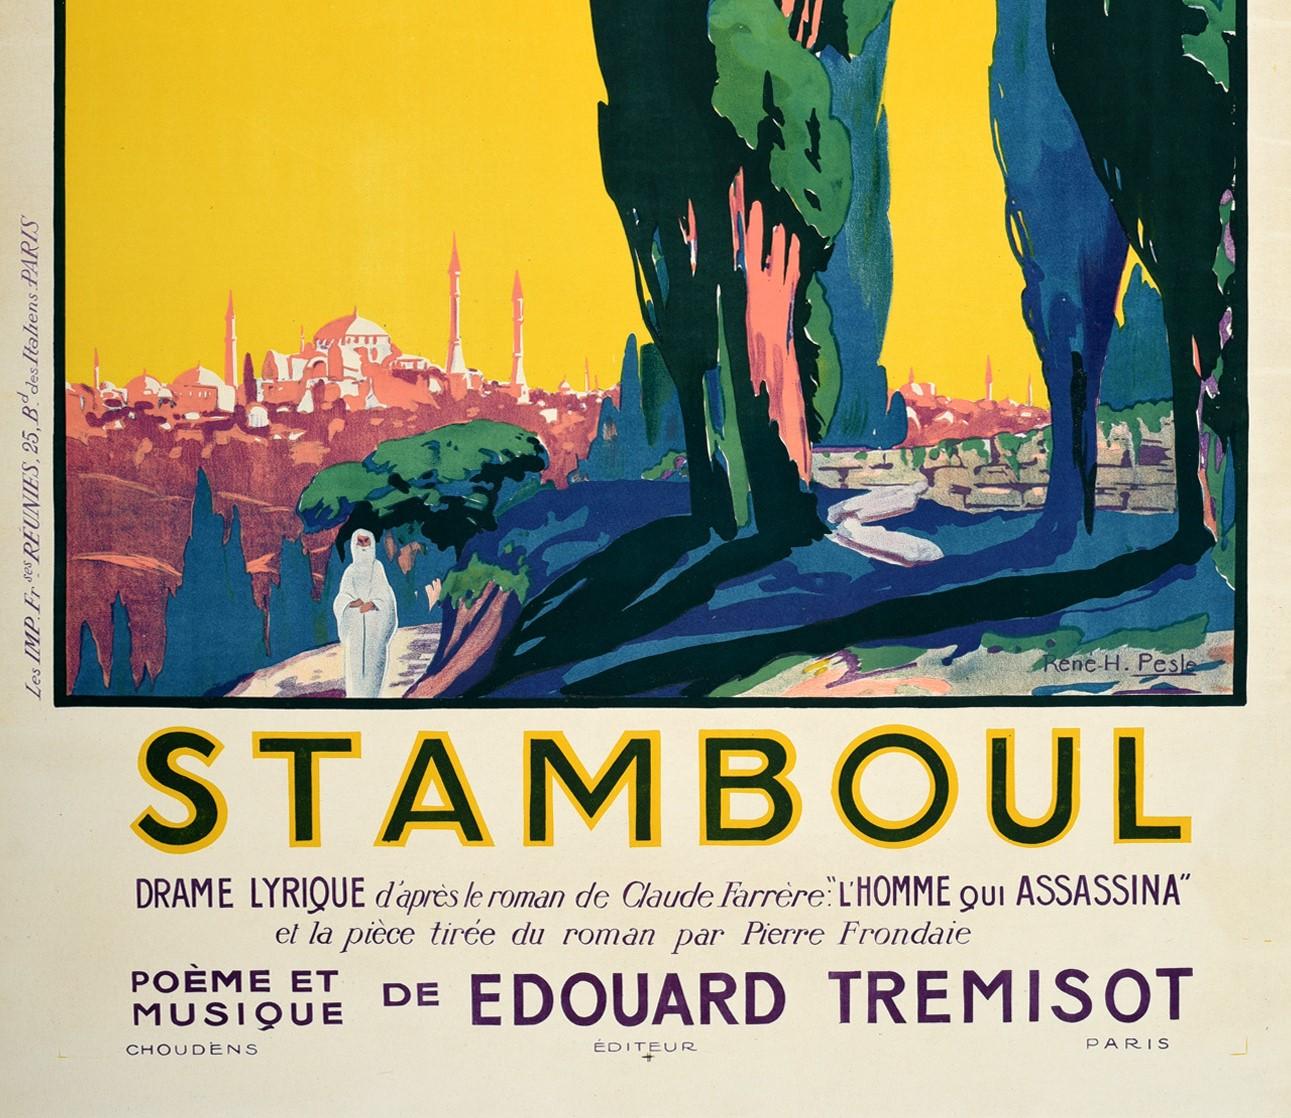 stamboul or istanbul